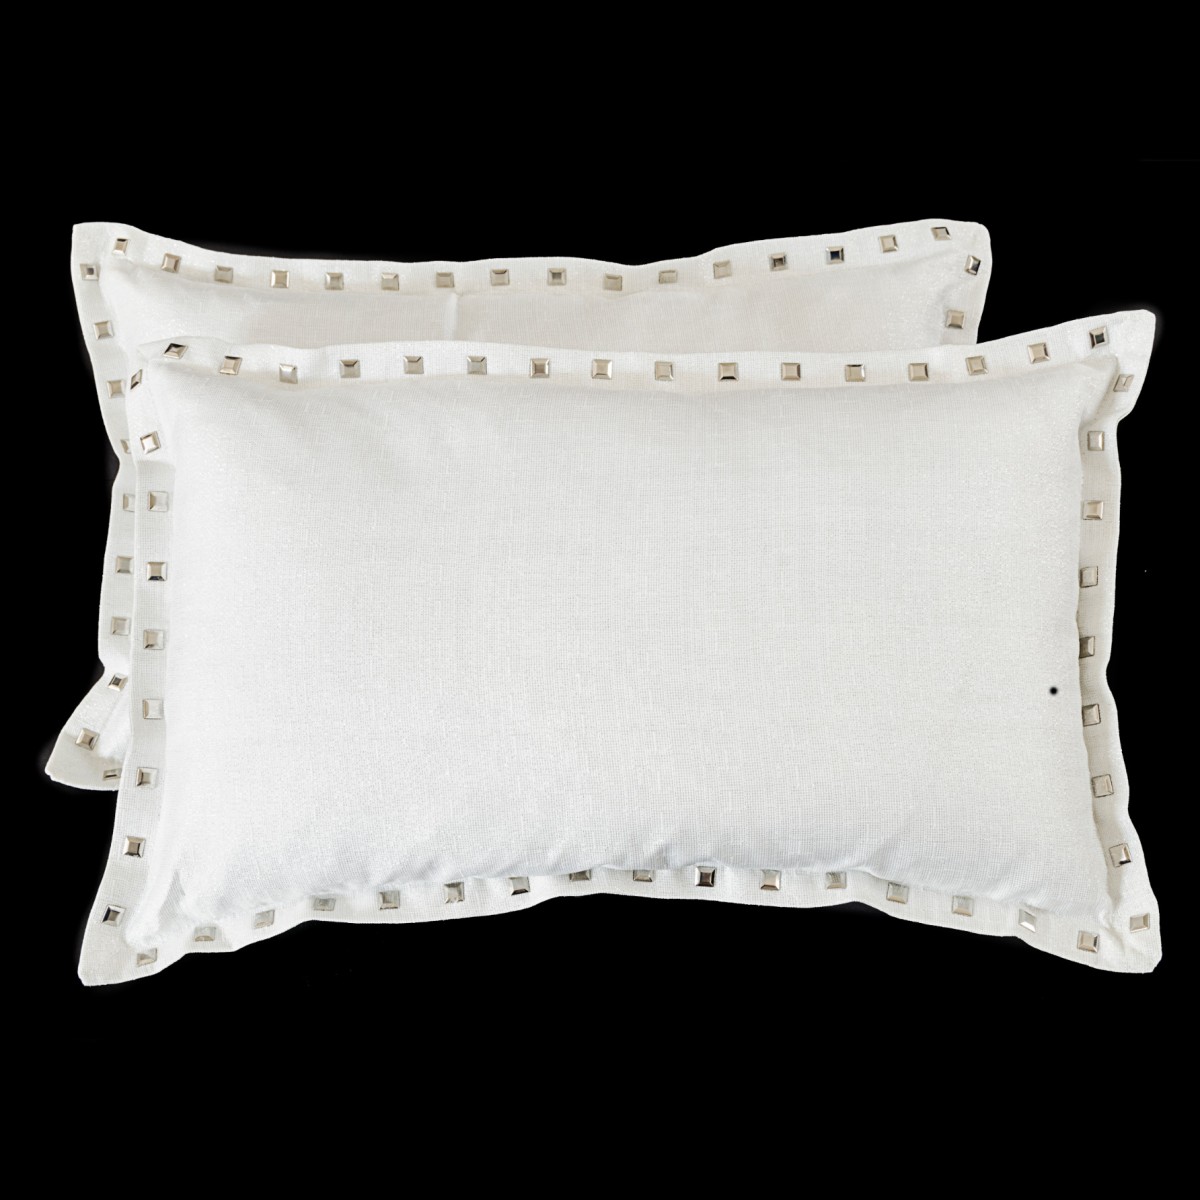 Rectangular Silver/White Threaded Pillows with Studs